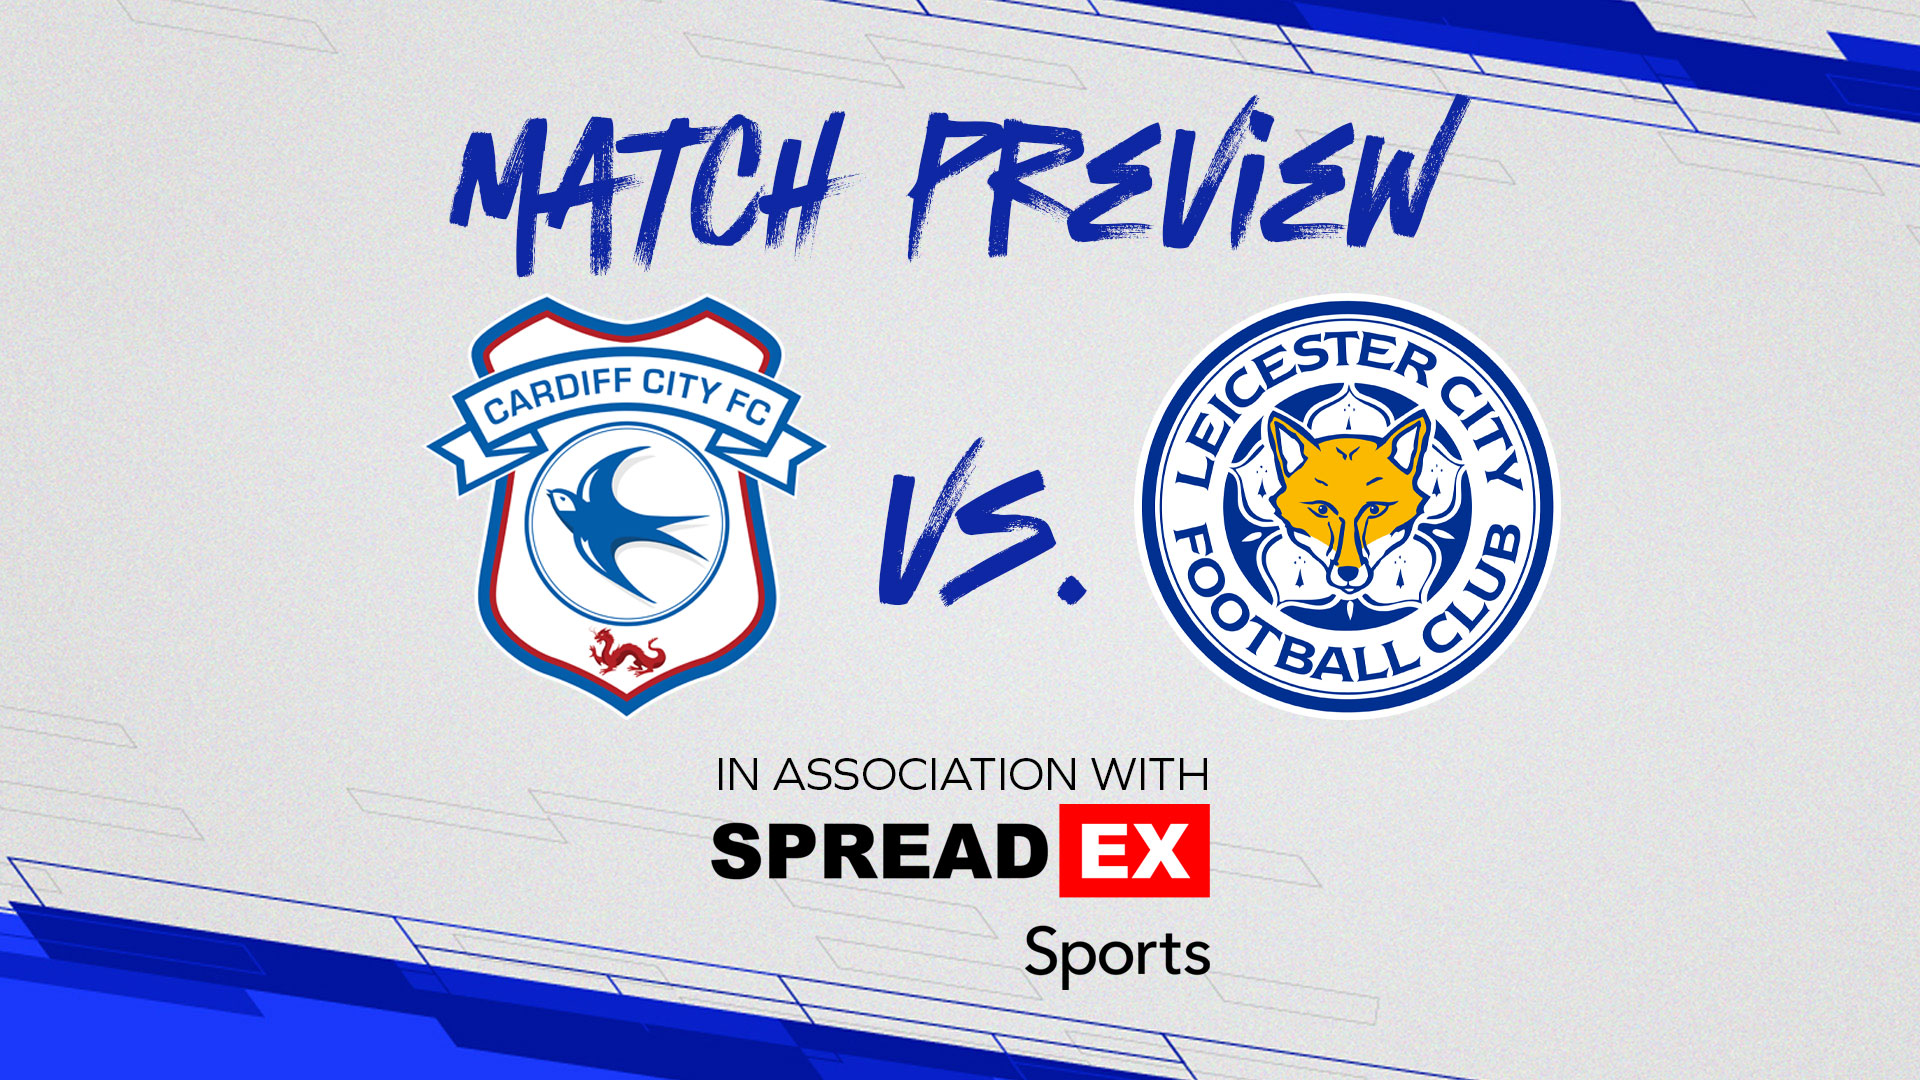 Match Preview: Cardiff City vs. Leicester City